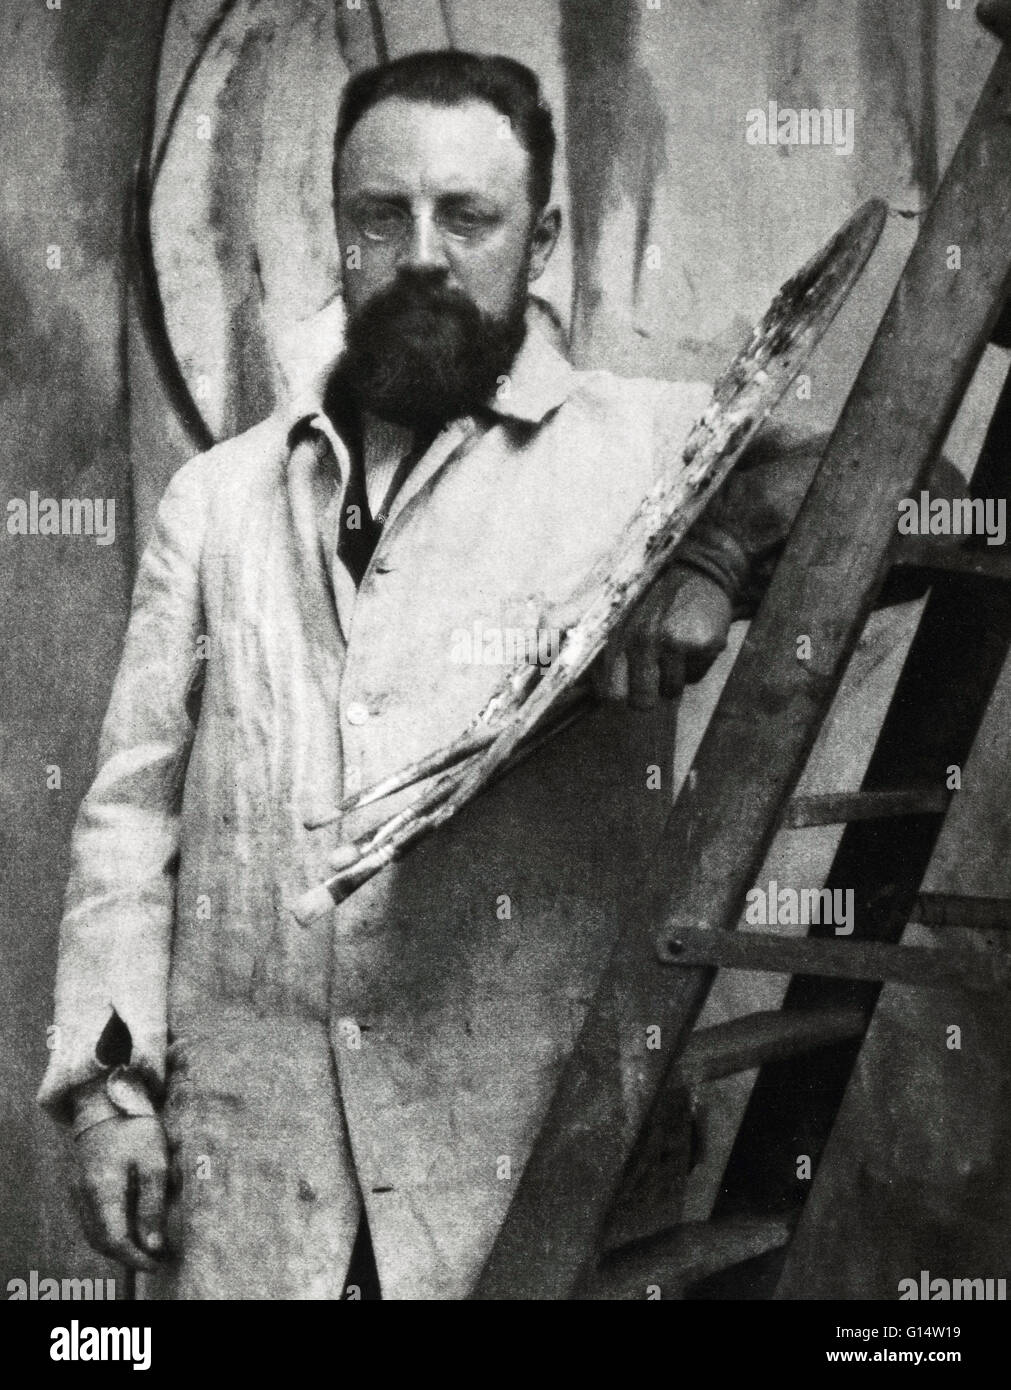 Matisse photographed by American photographer Alvin Langdon Coburn in 1913. Henri-Émile-Benoît Matisse (December 31, 1869 - November 3, 1954) was a French artist, known for his use of color and his fluid and original draughtsmanship. He was a draughtsman, Stock Photo